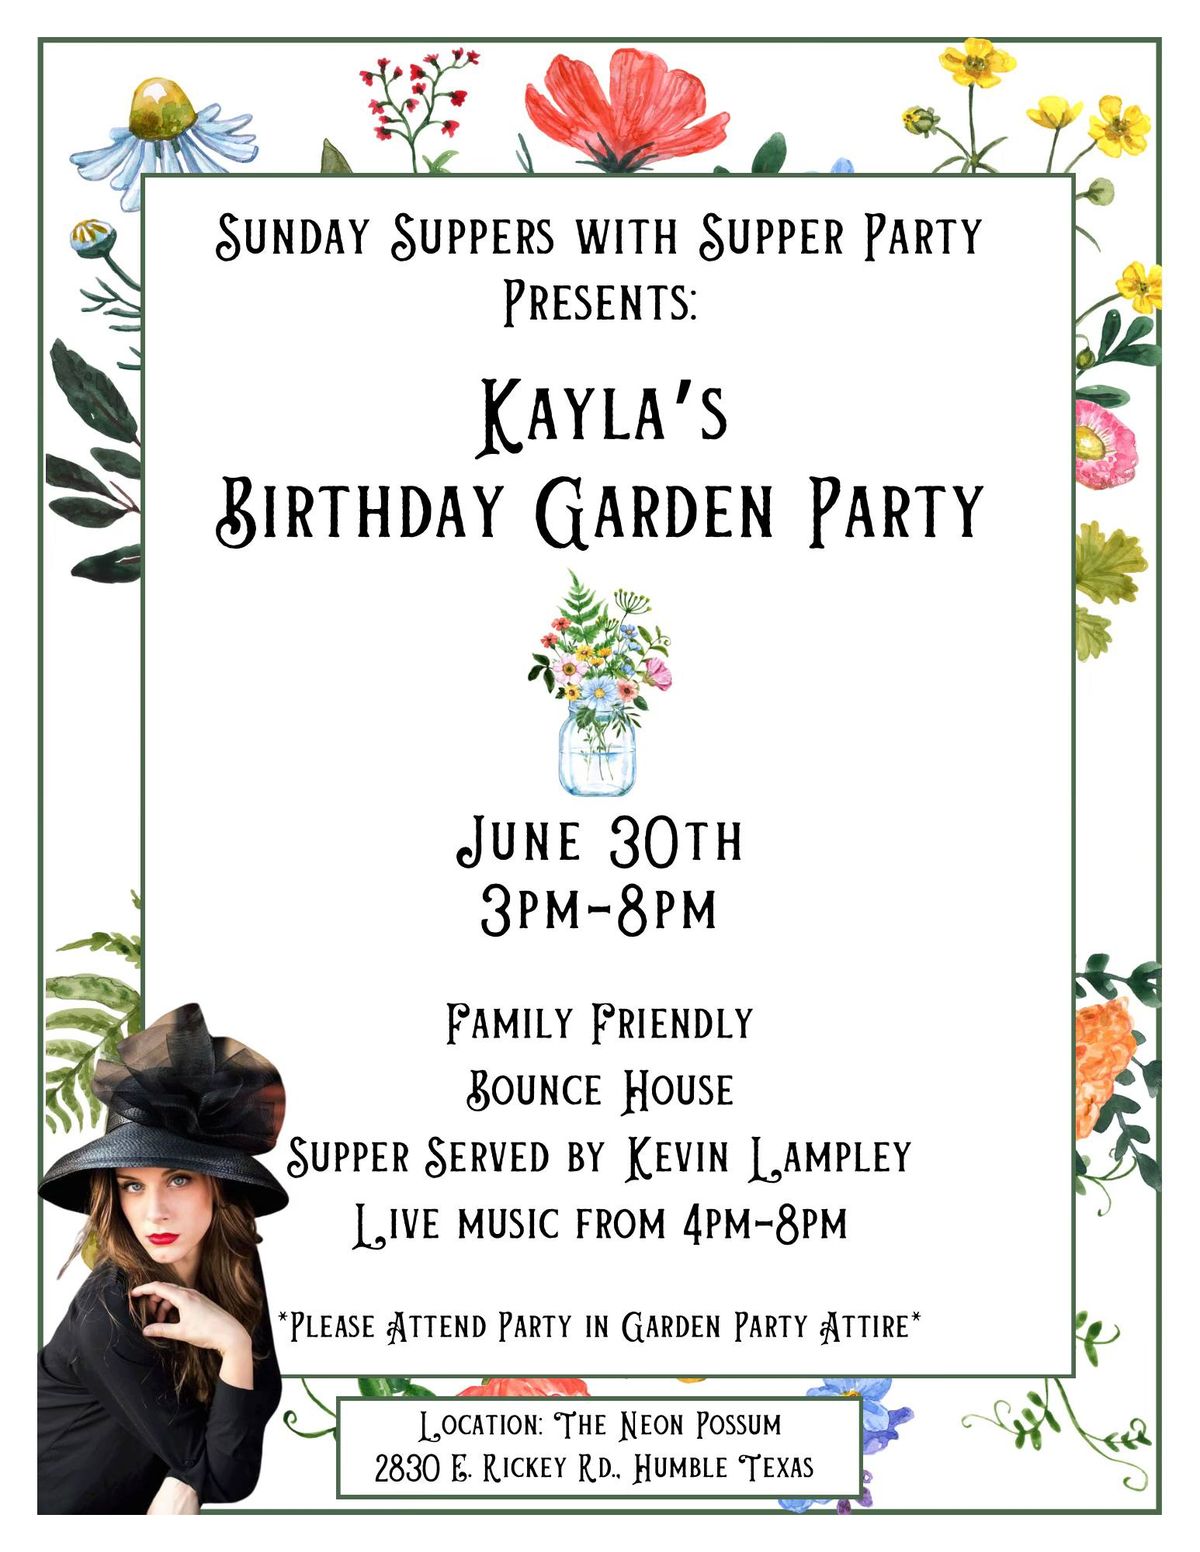 Sunday Supper with Supper Party Presents: Kayla's Garden Party 